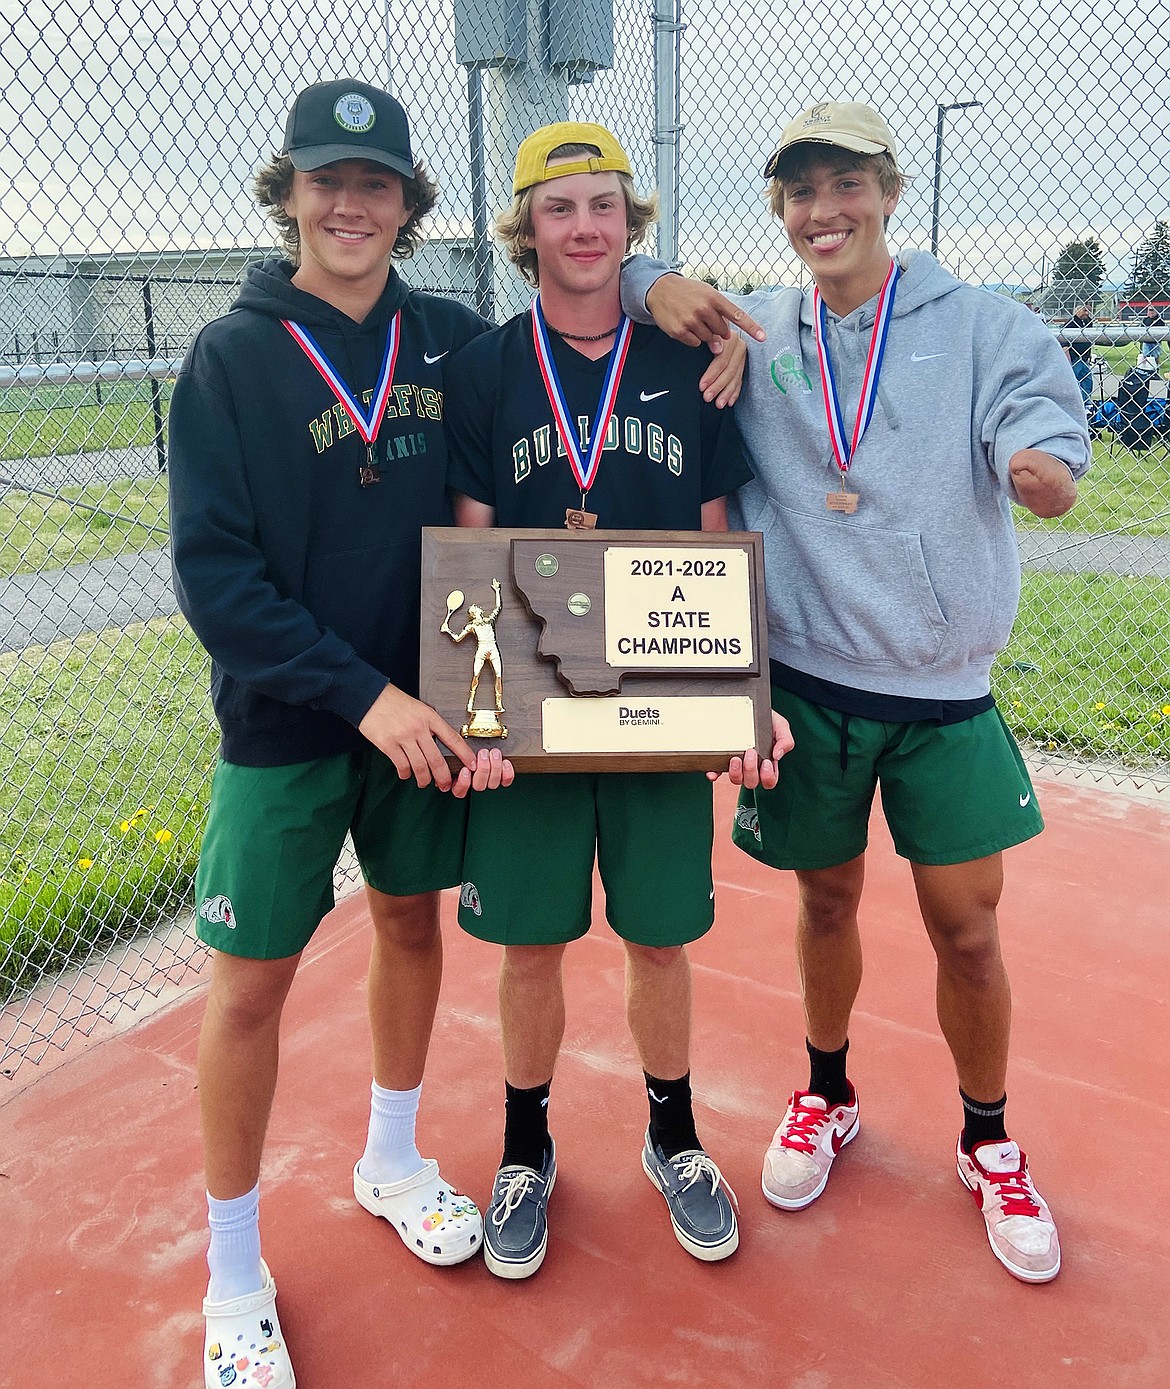 Bulldogs Mason Kelch, Aaron Dicks and Joe Brandt hold the State A Championship trophy after winning the state team title in Bozeman on Friday. (Courtesy photo)